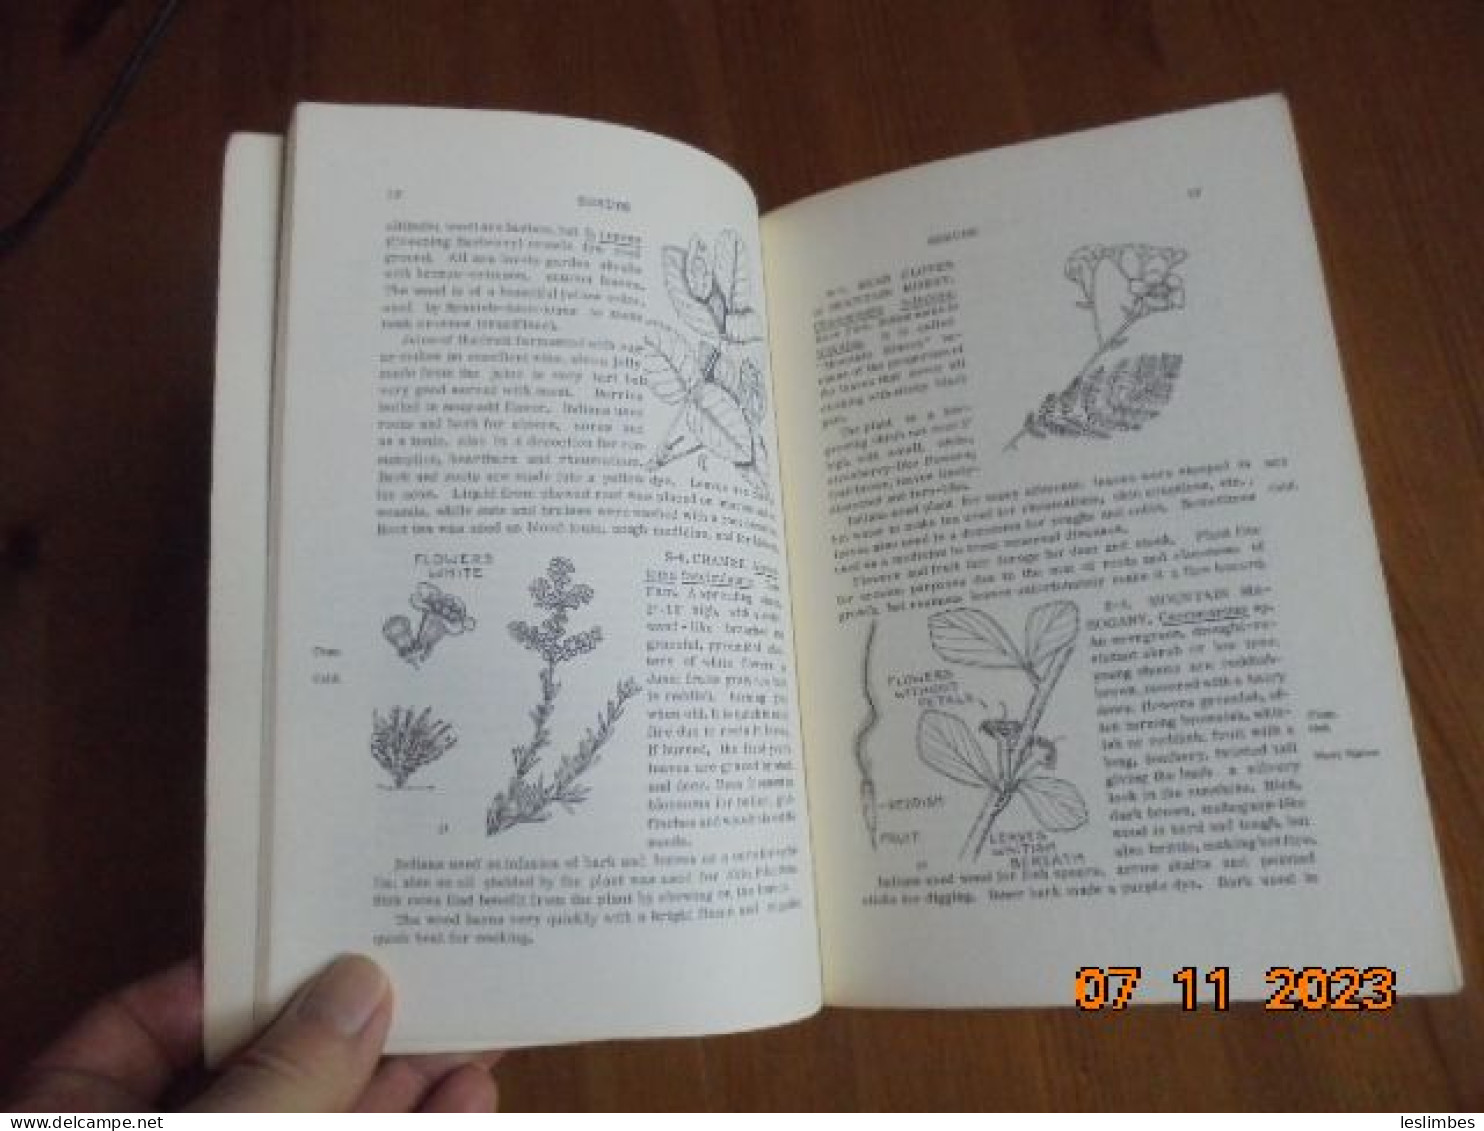 Common Edible And Useful Plants Of The West: With Illustrations Of 116 Plants - Muriel Sweet - Naturegraph 1962 - Vita Selvaggia